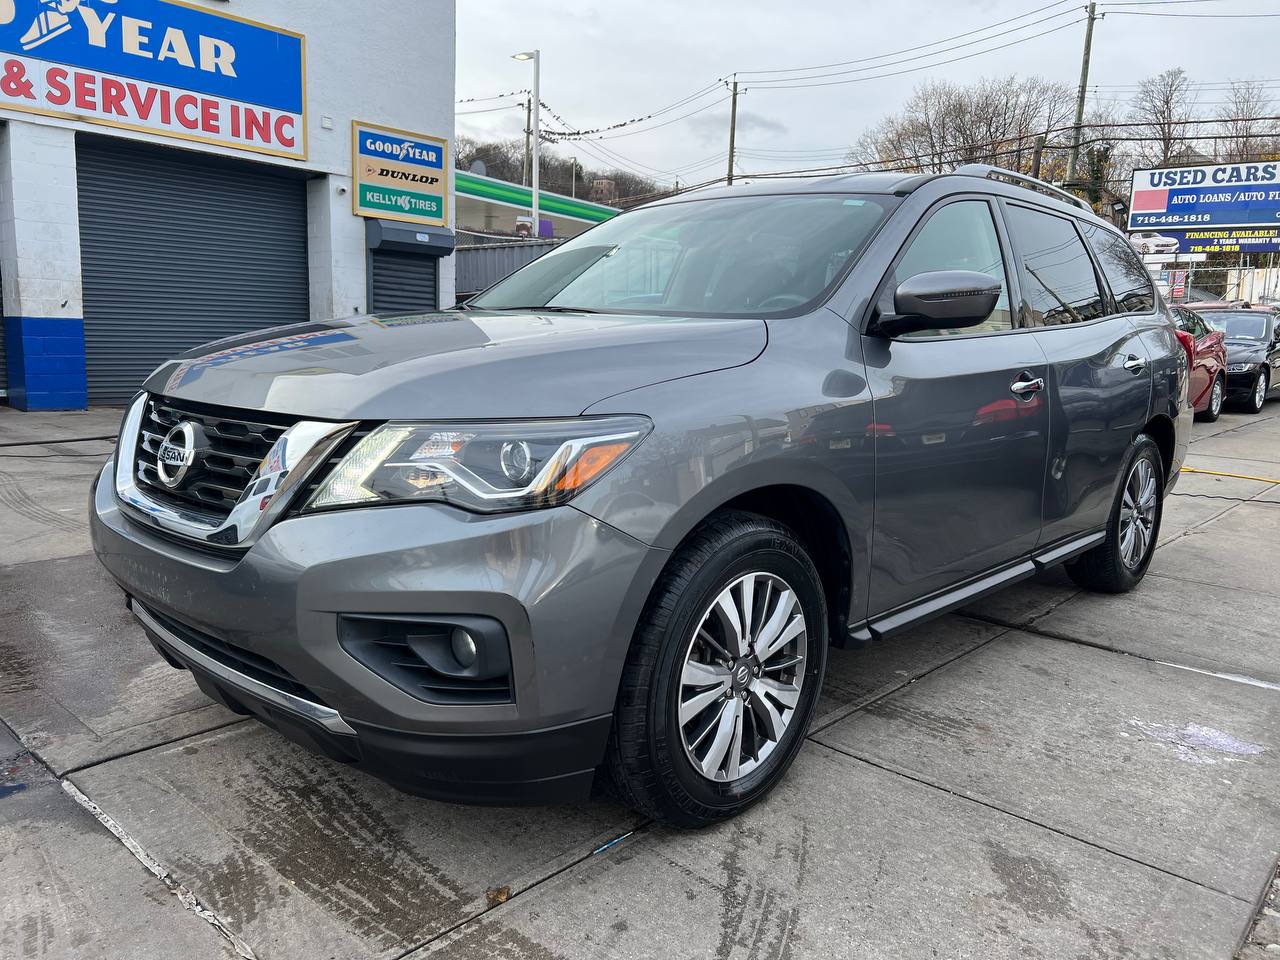 Used Car - 2020 Nissan Pathfinder SV for Sale in Staten Island, NY